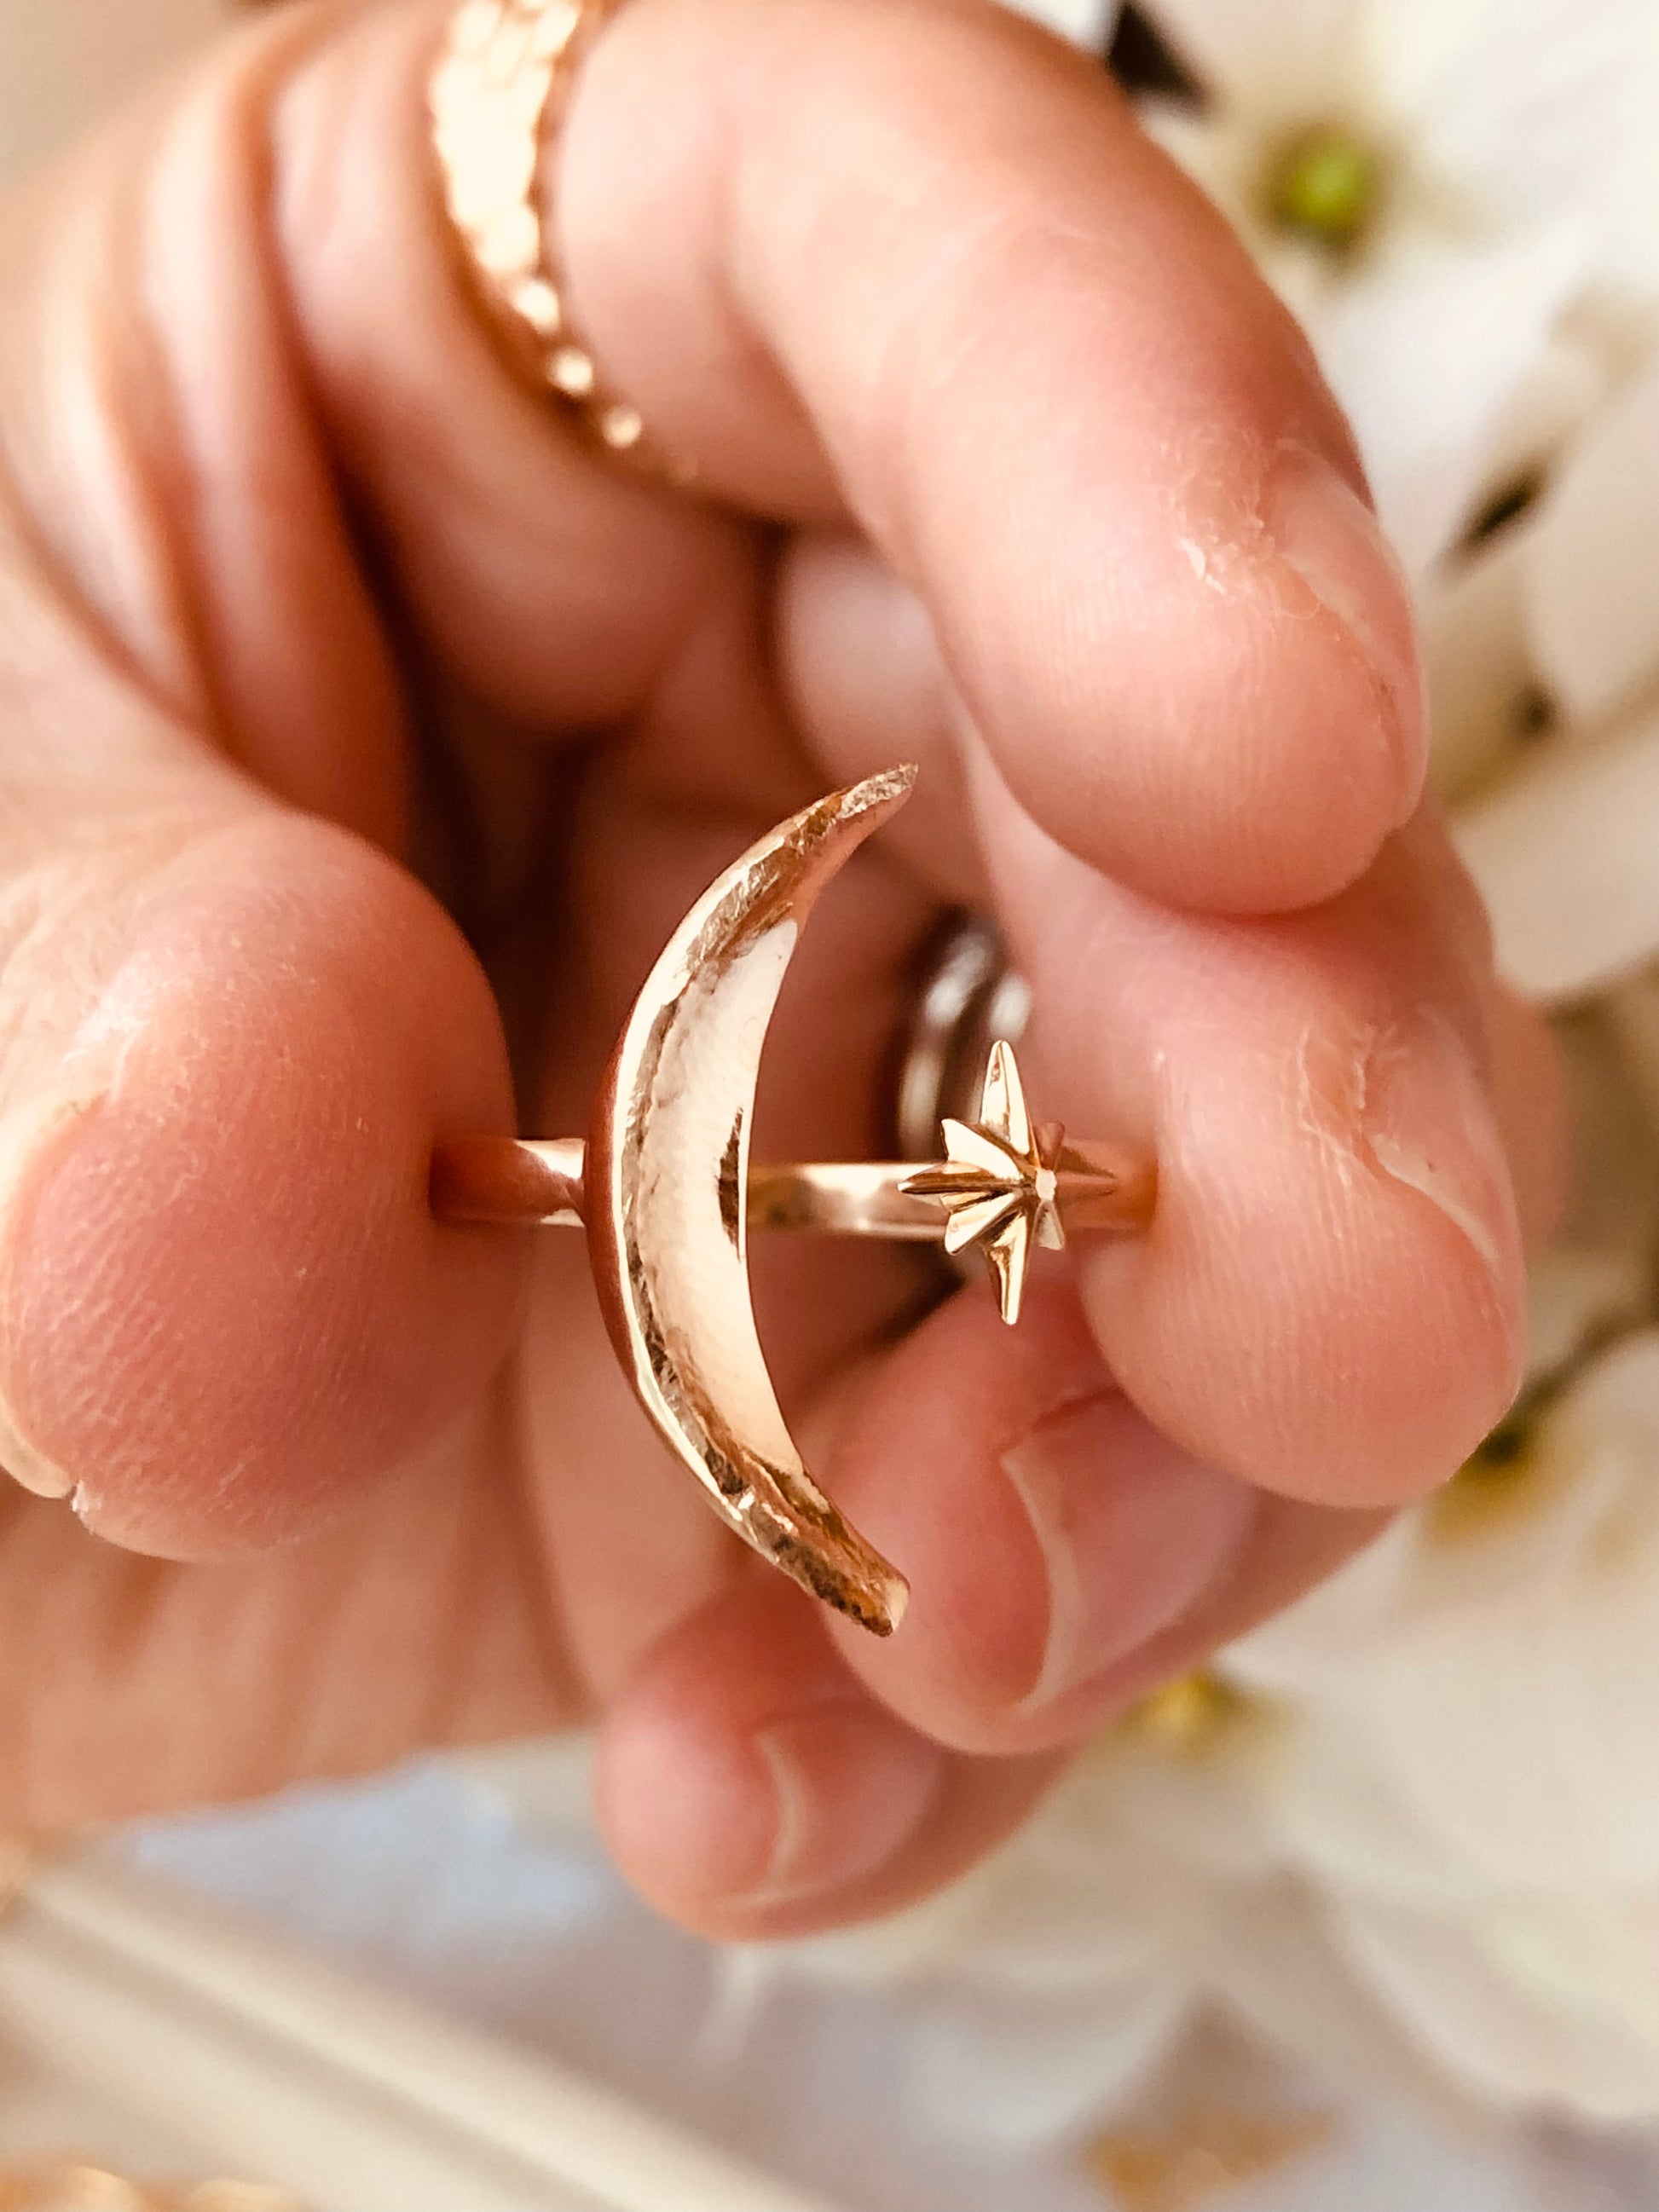 Moon and Star Ring, Adjustable Ring, Moon and Star Ring, Eclipse Ring, Celestial Jewelry, Crescent Moon Ring, Statement Ring, Gift For Her